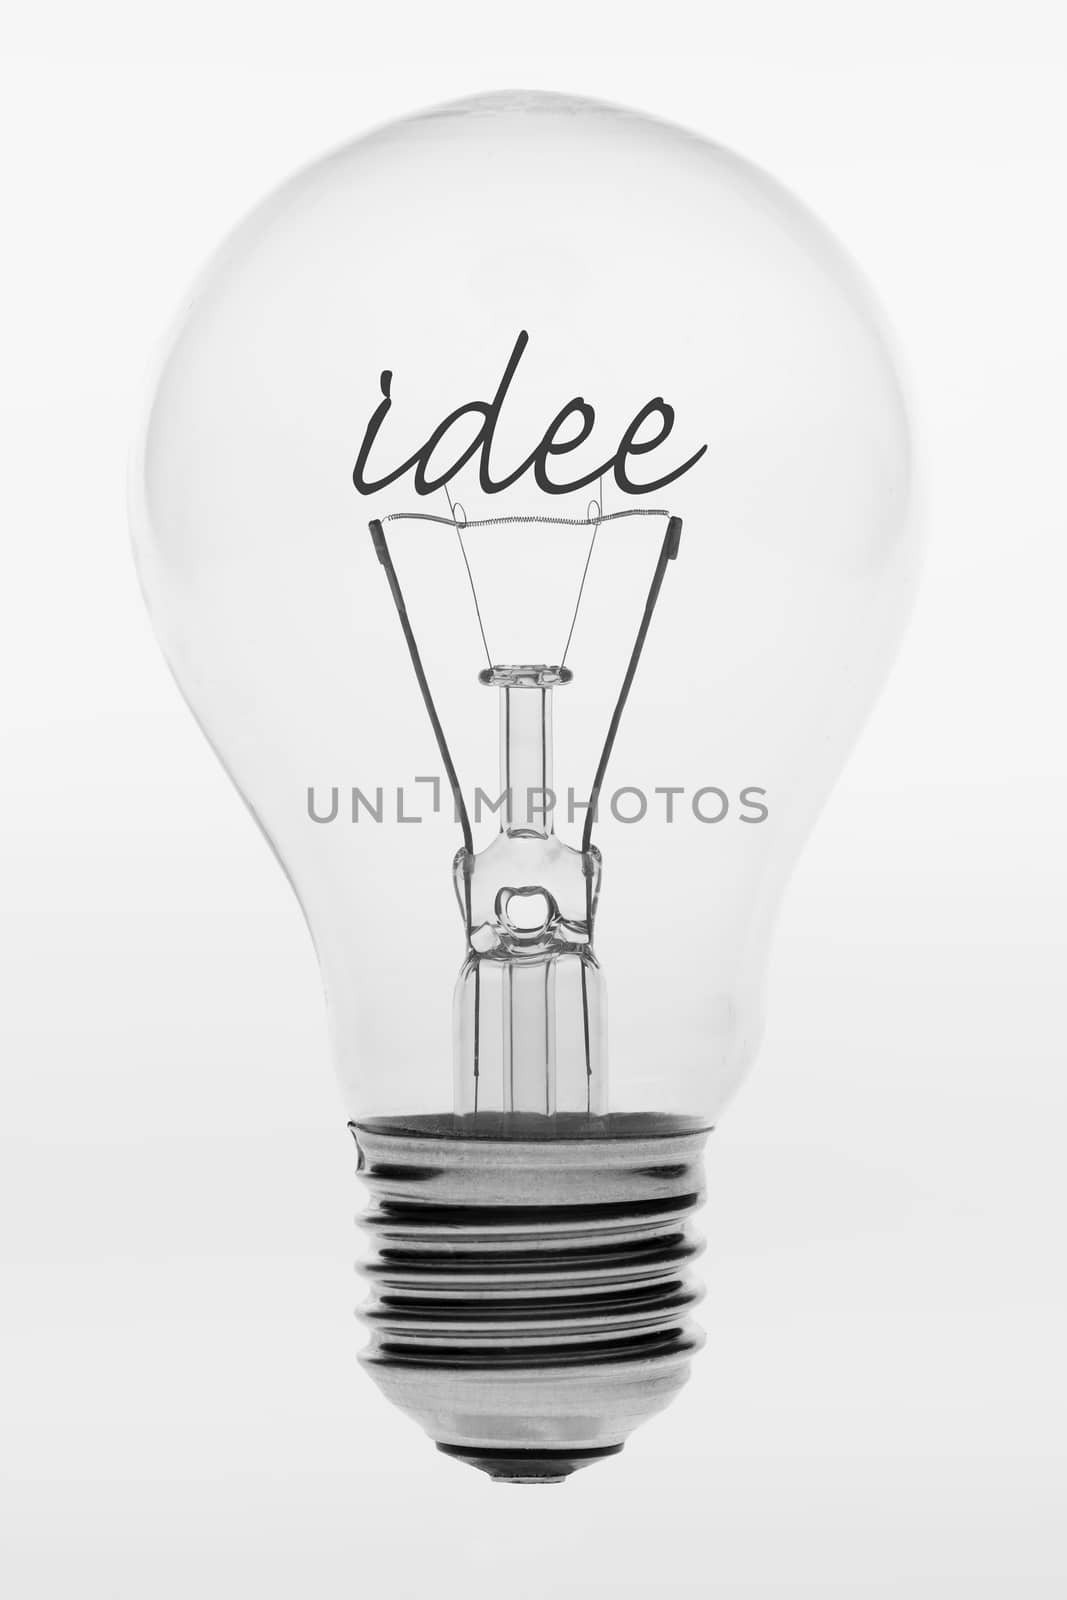 Old fashioned light bulb with the Dutch text idea formed by filaments in the crystal ball
